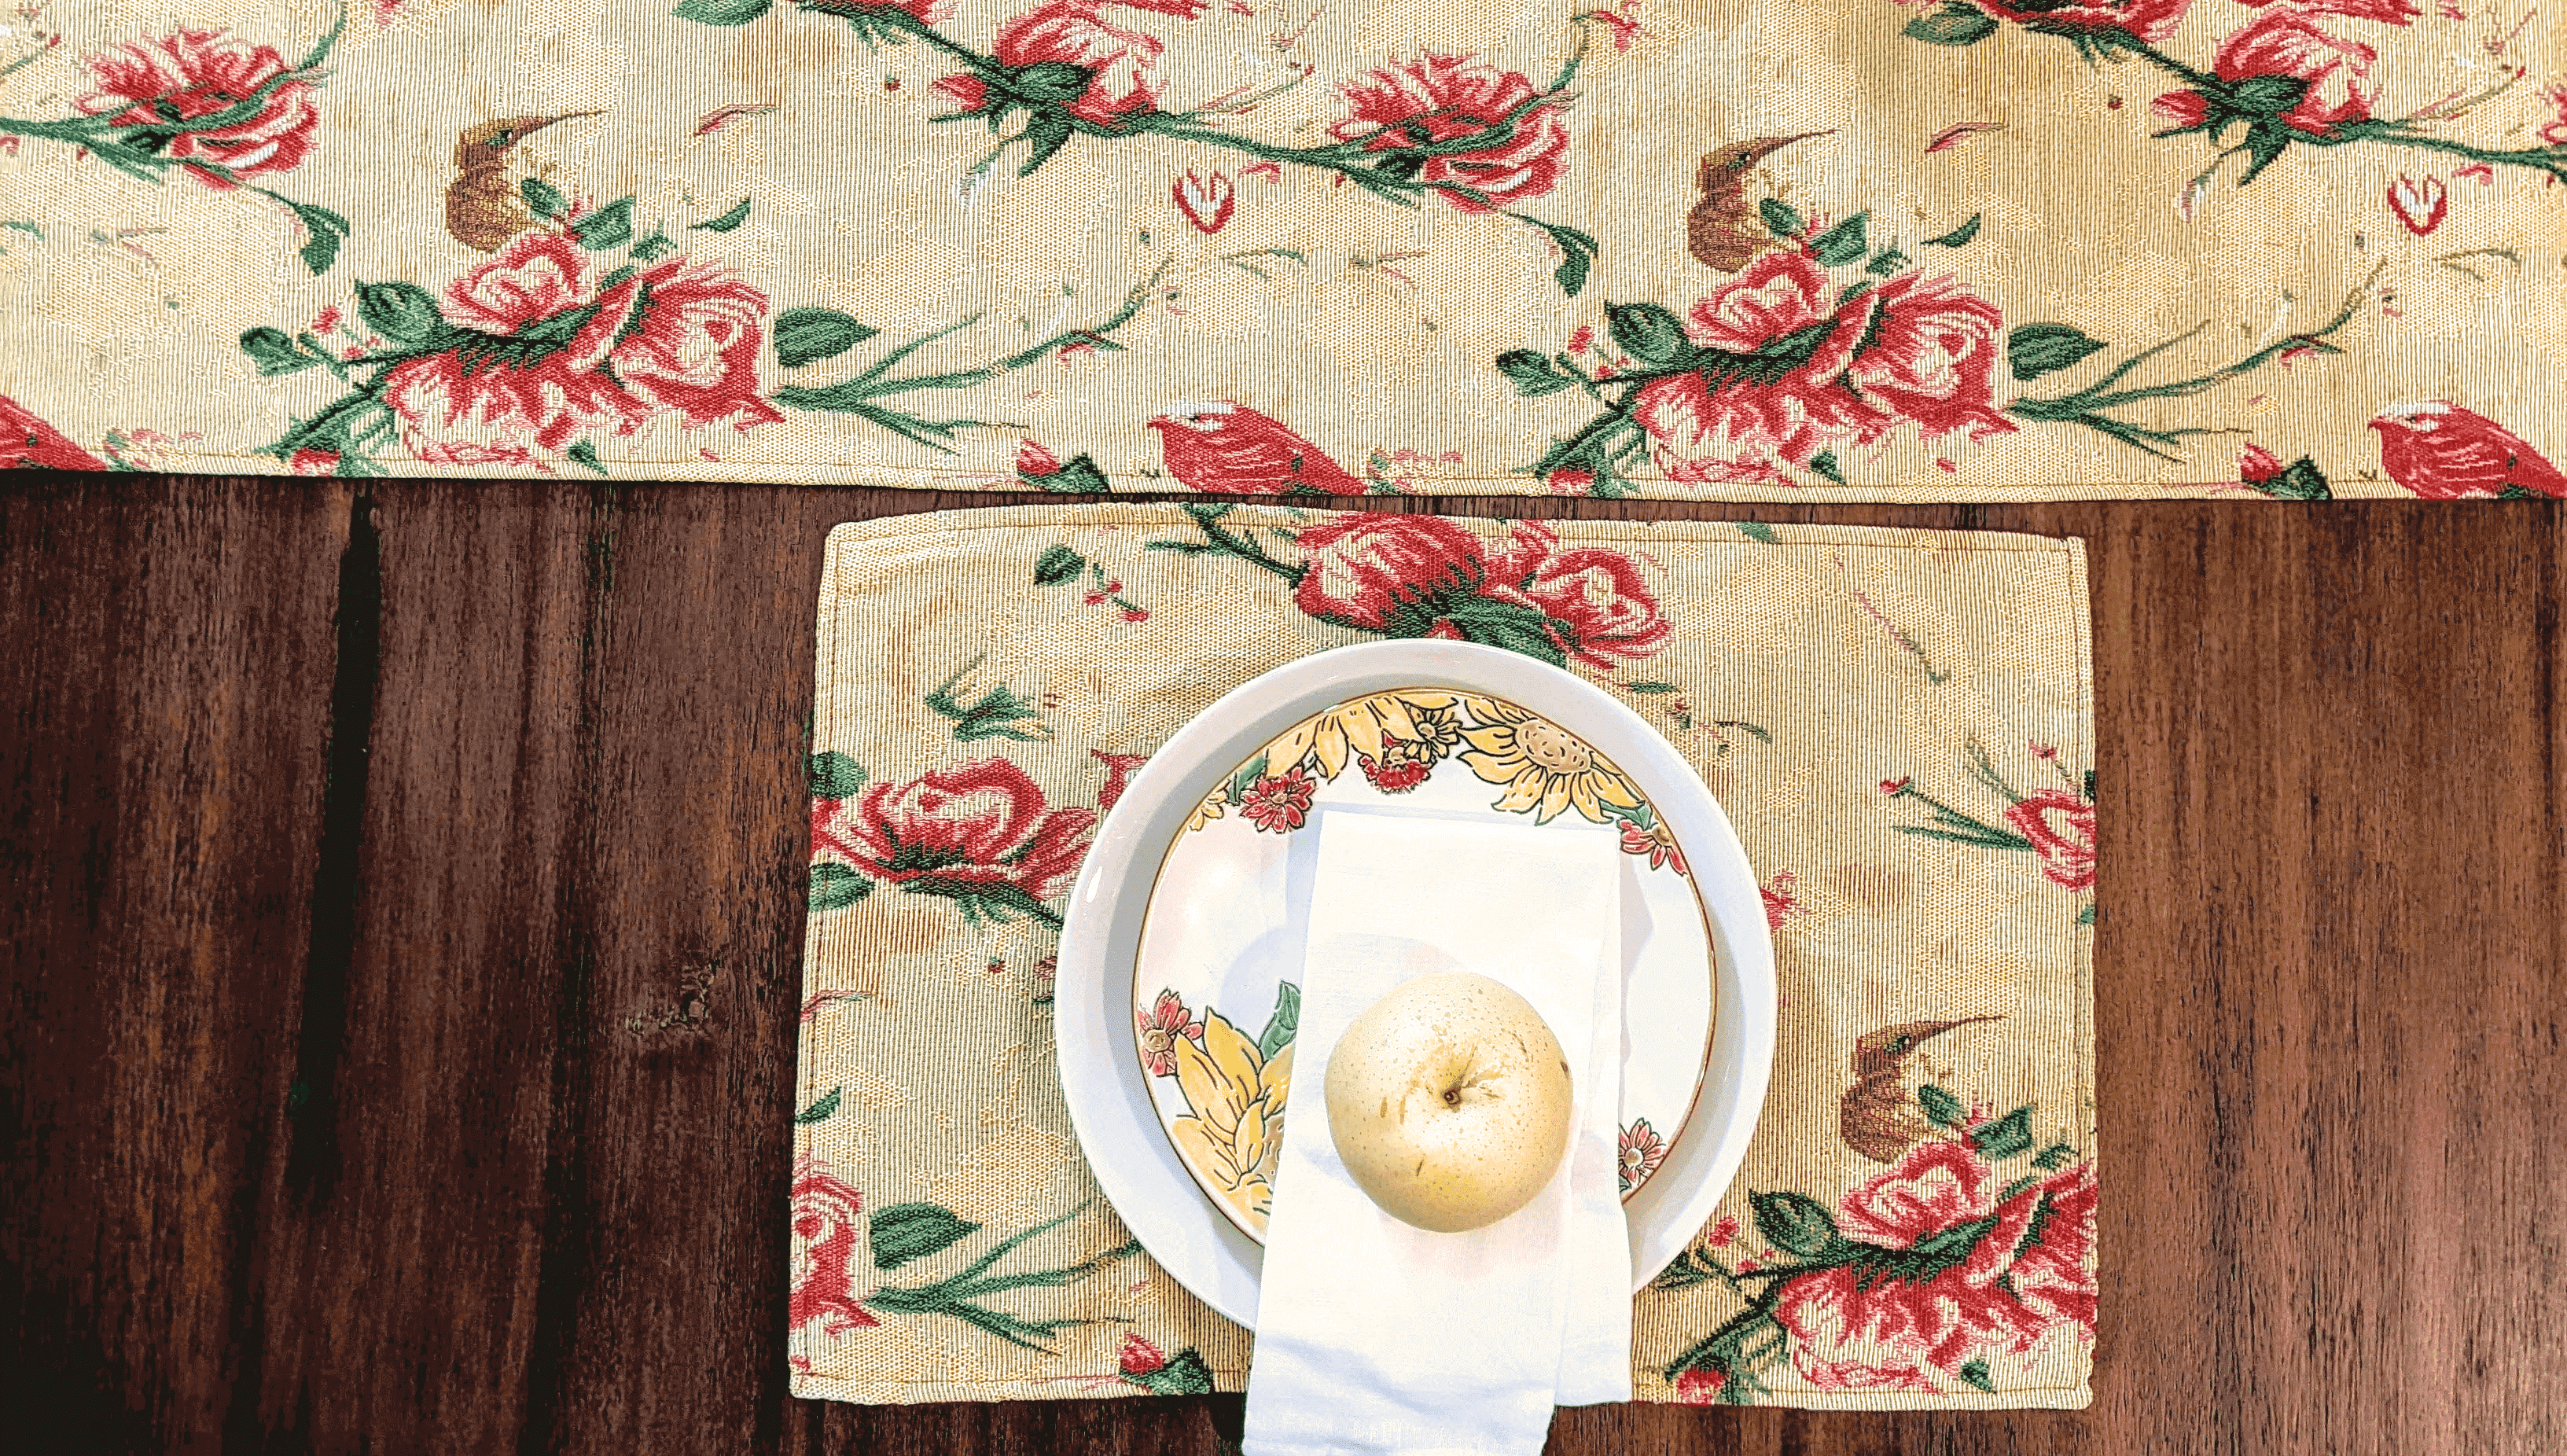 Spring Summer Floral Red Rose Flowers Hummingbirds Birds Golden Yellow Orange Kitchen decor decoration placemat table mat place mats small business online shopping mothers day gift idea